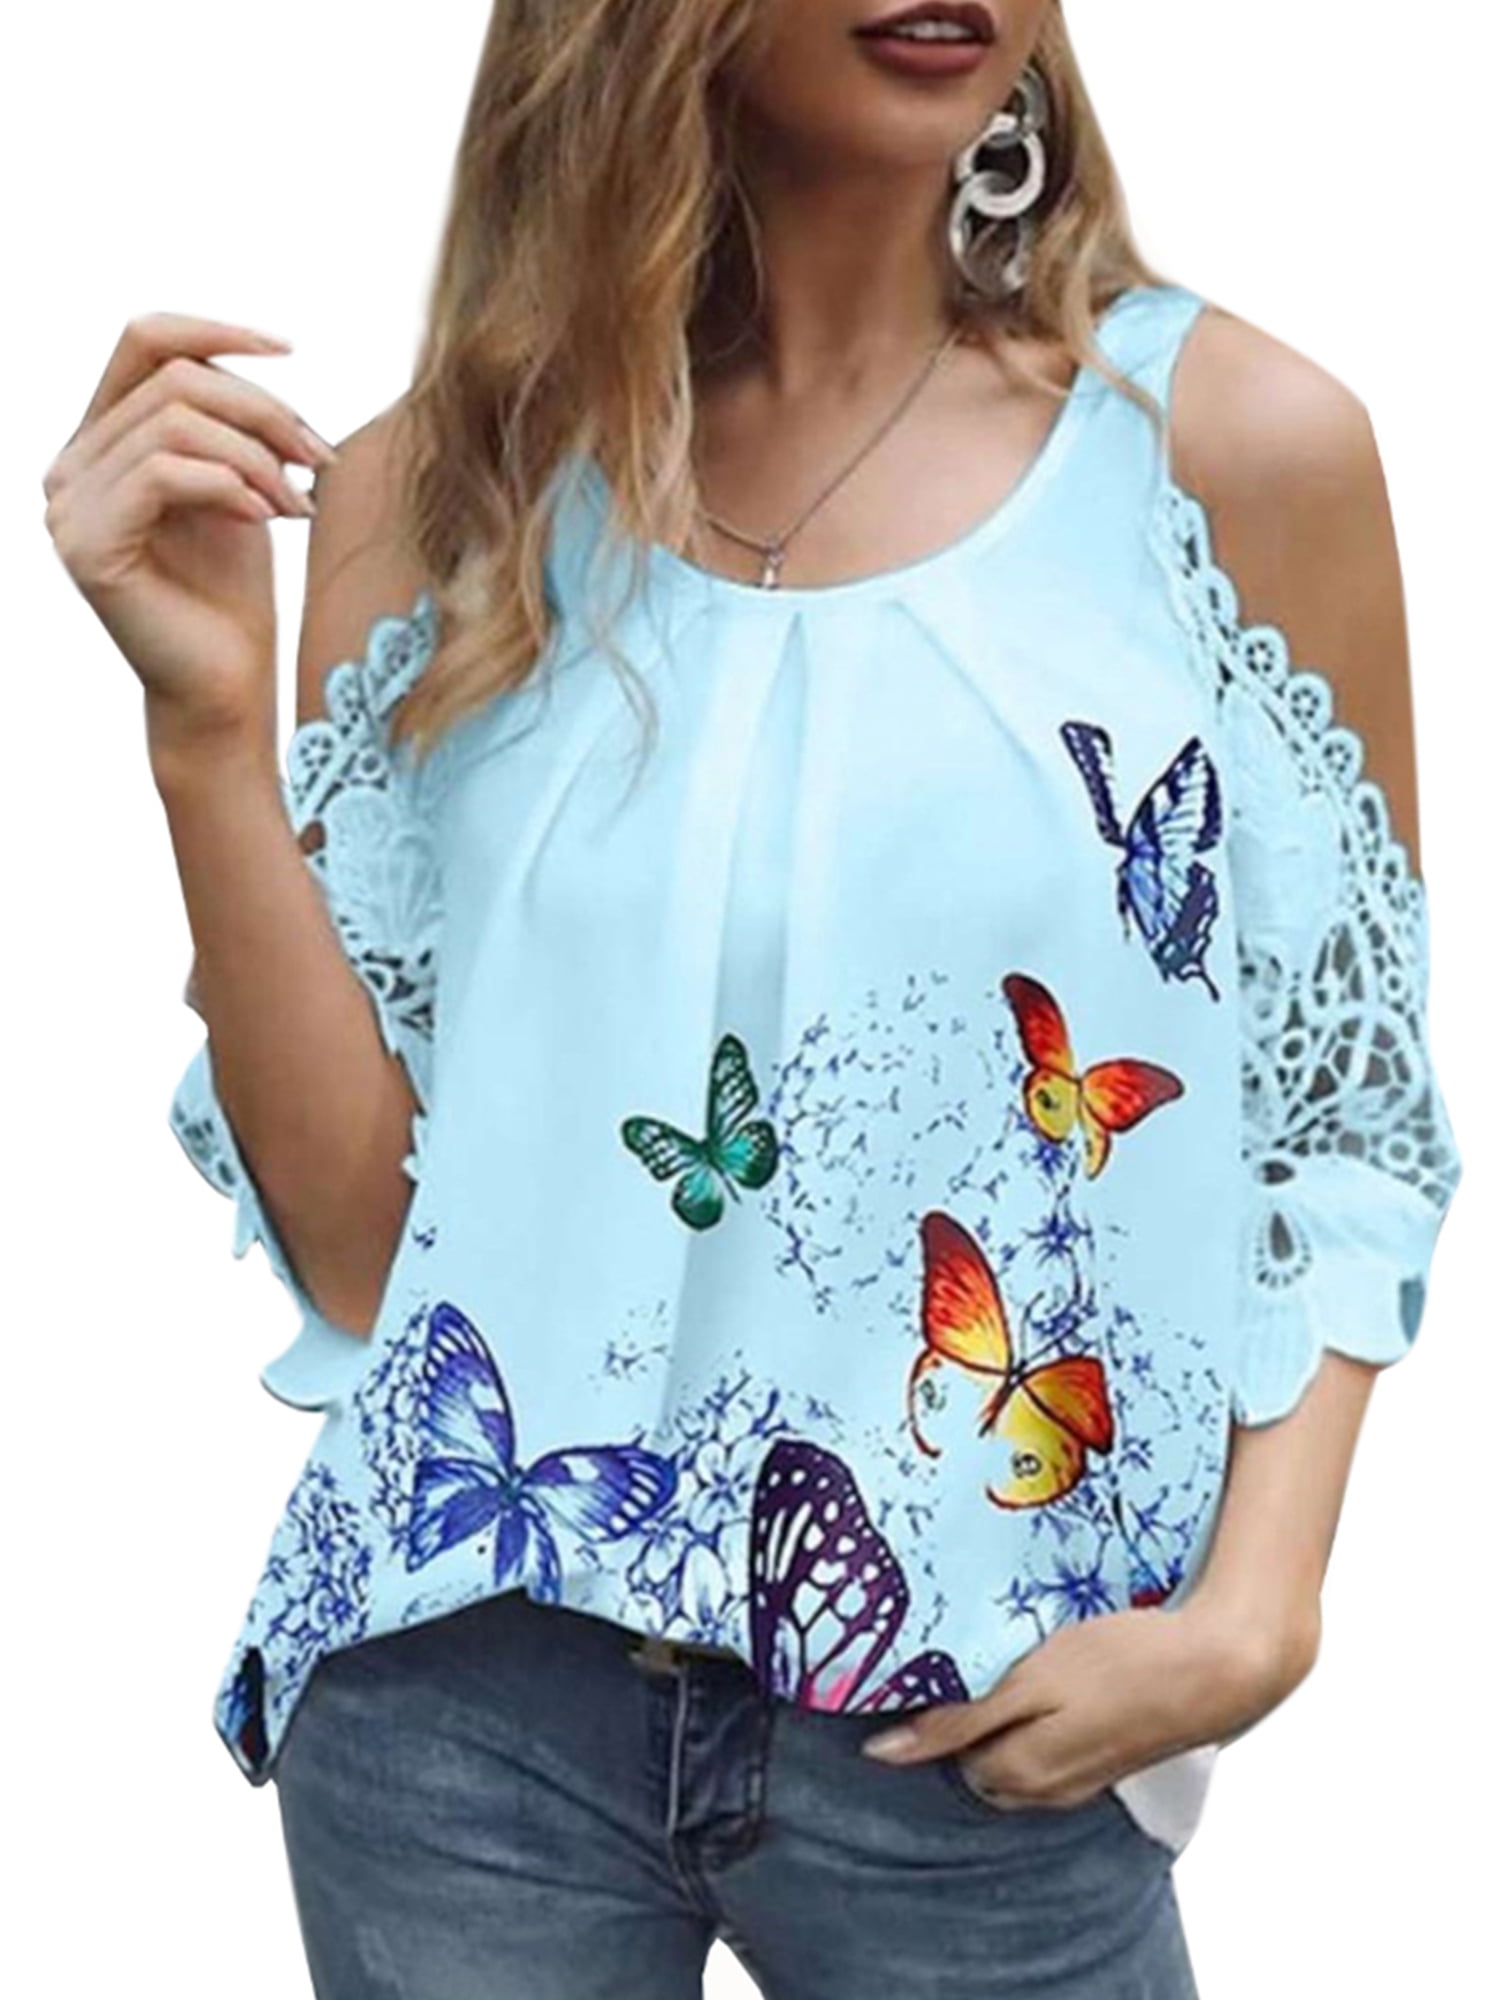 Plus Size Womens Floral Printed Short Sleeve Shirt Summer Cold Shoulder Tops Casual Blouse